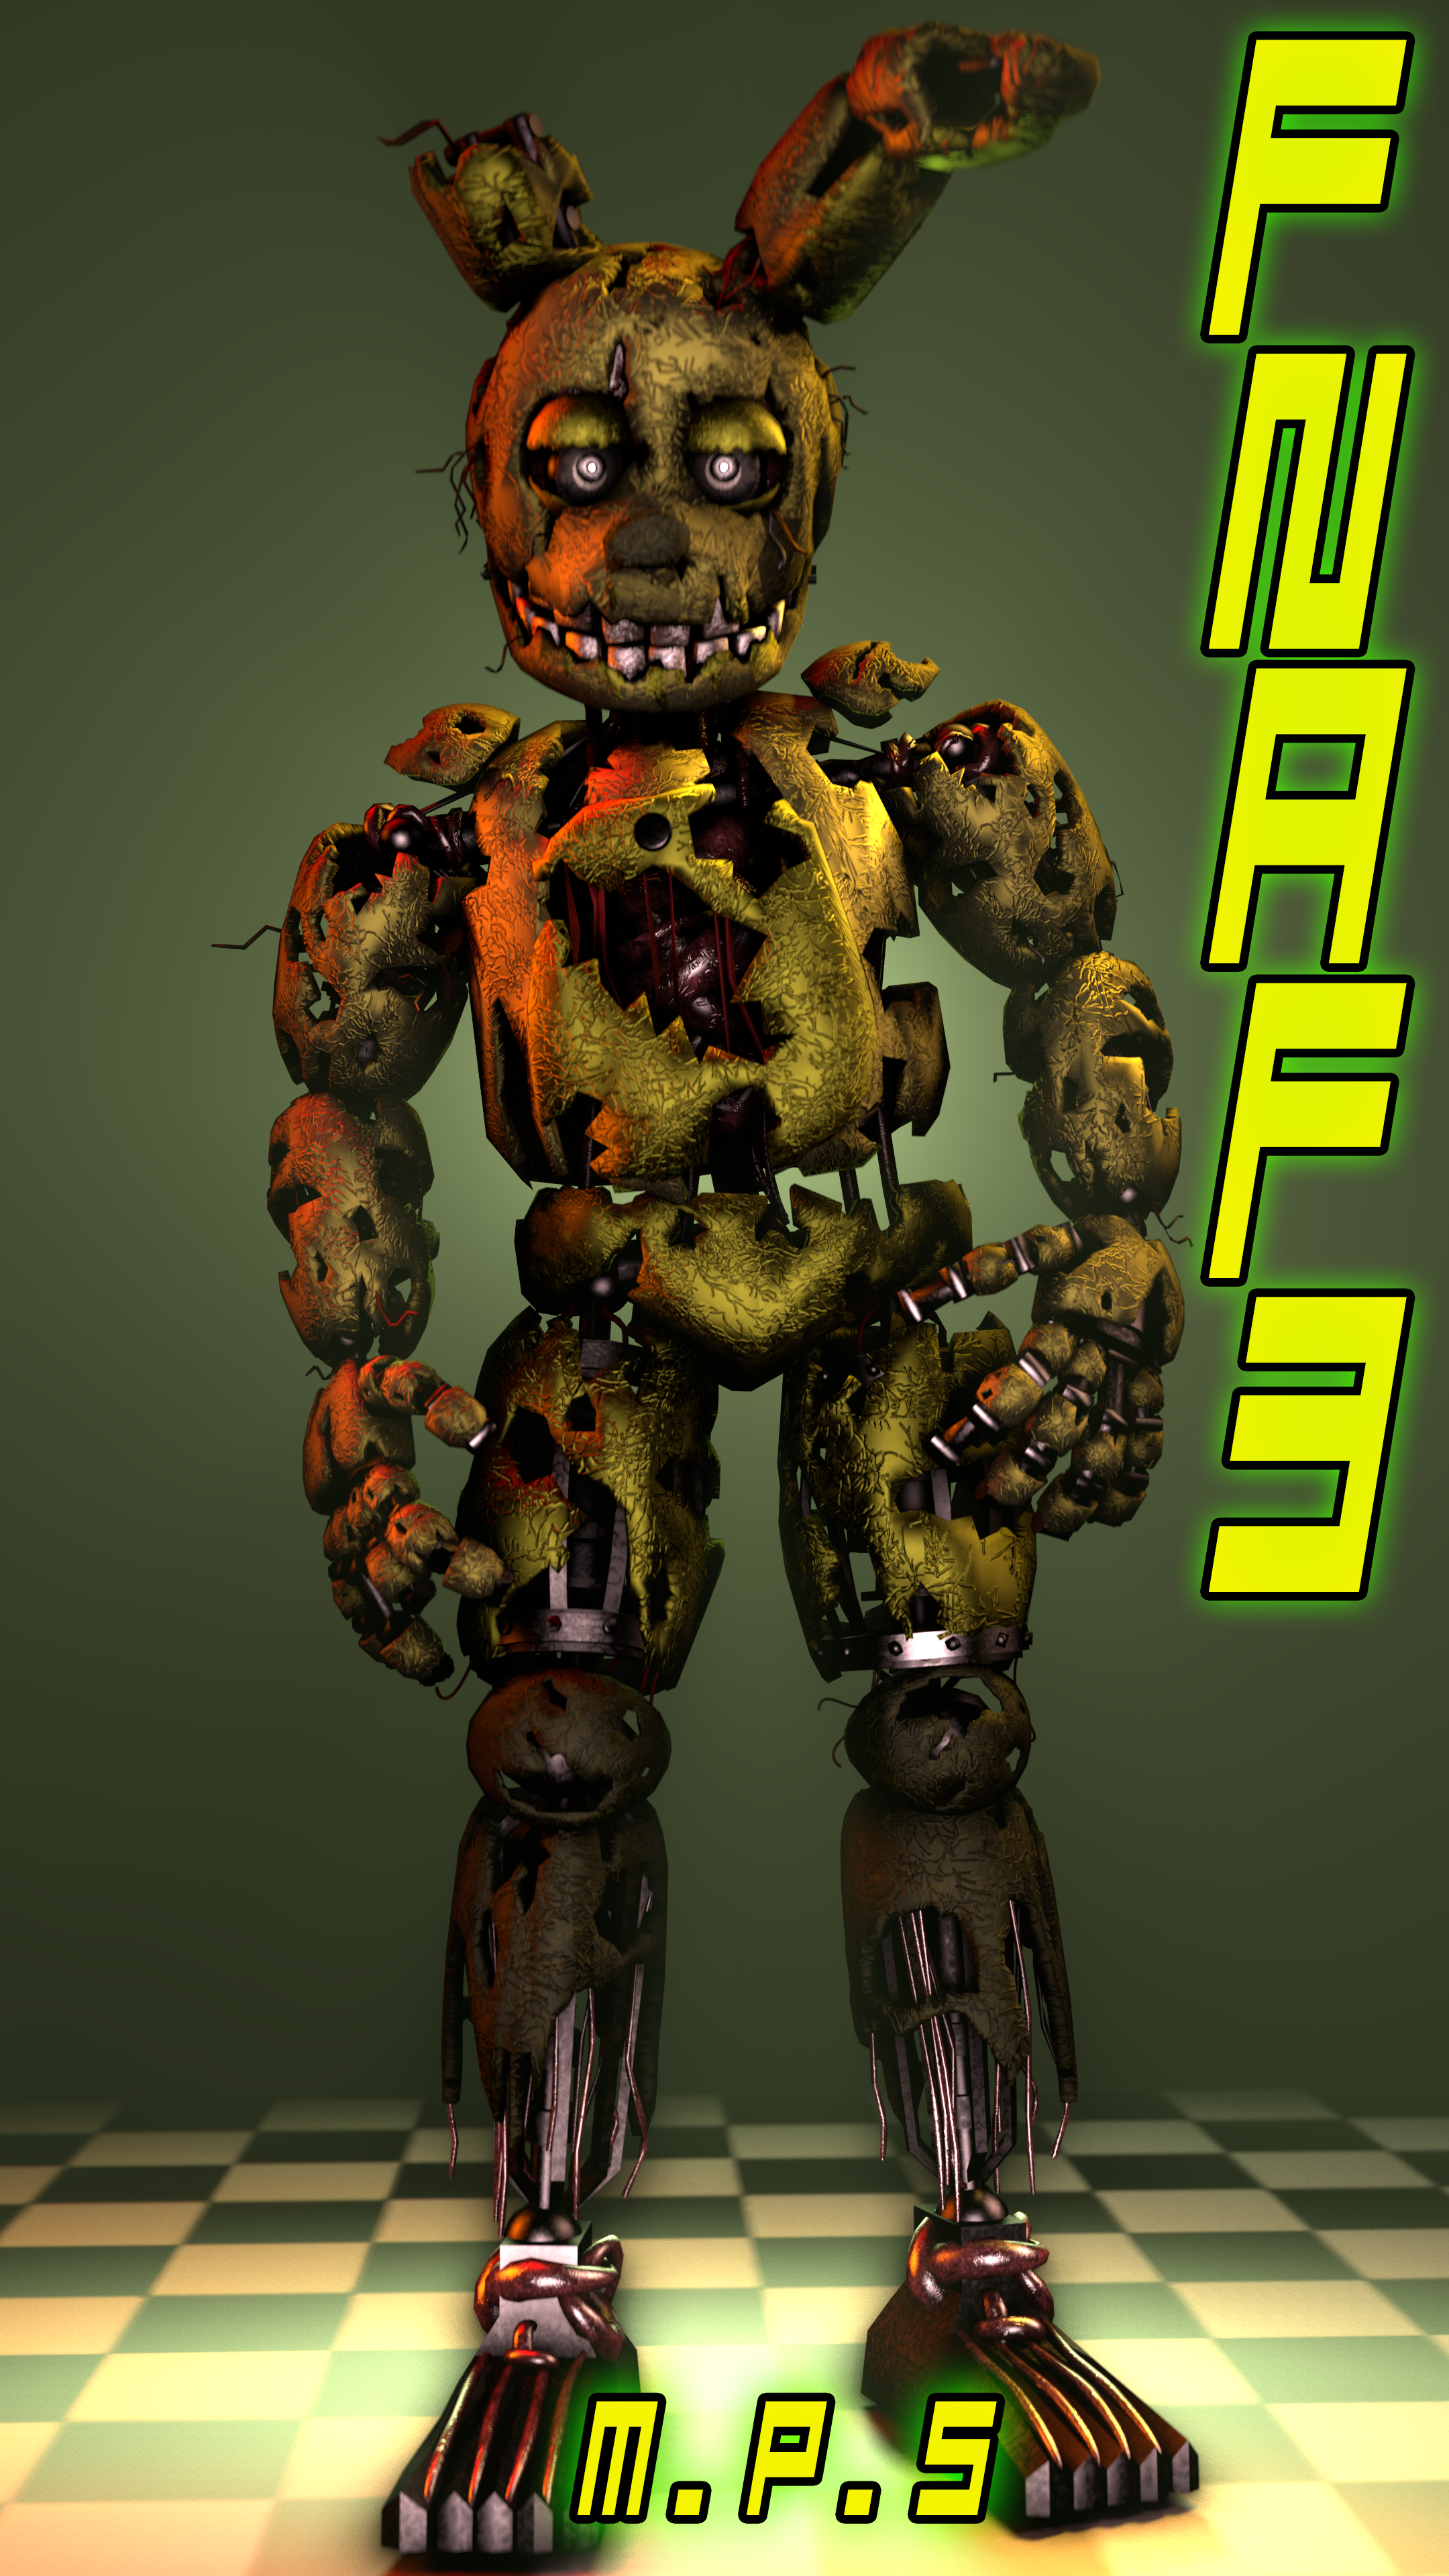 SpringTrap - Five Nights At Freddy's 3 by J04C0 on DeviantArt